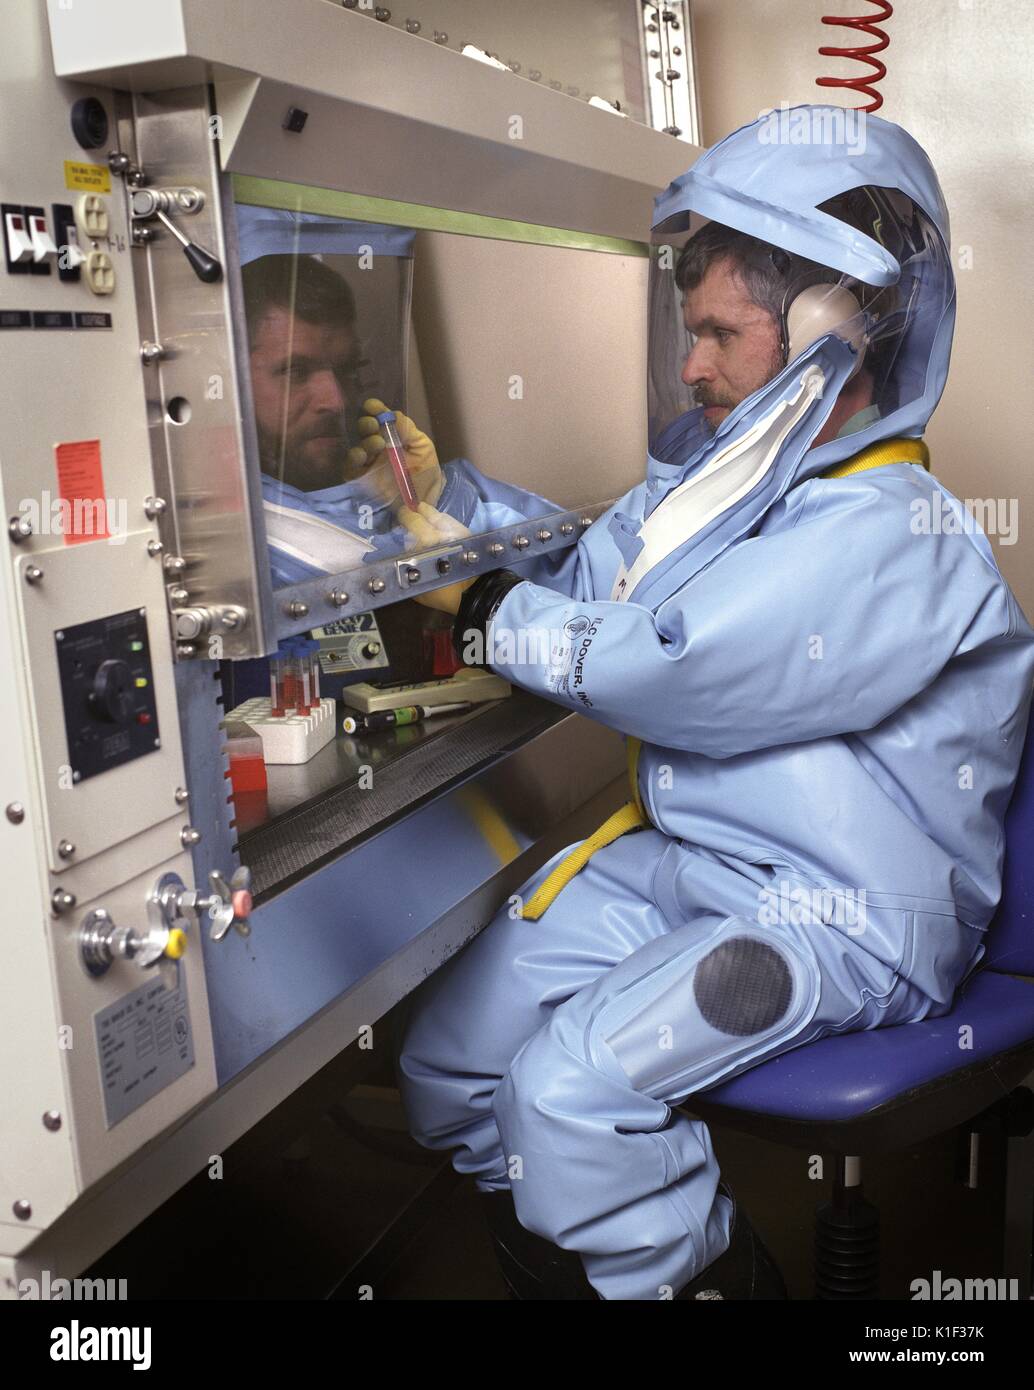 A CDC scientist conducts laboratory research in the Biosafety Level 4 laboratory, Atlanta, GA. LabScience, A CDC scientist wearing a protective suit with helmet and face mask is seated at an air flow hood as he conducts his studies. Image courtesy CDC, 2002. Stock Photo